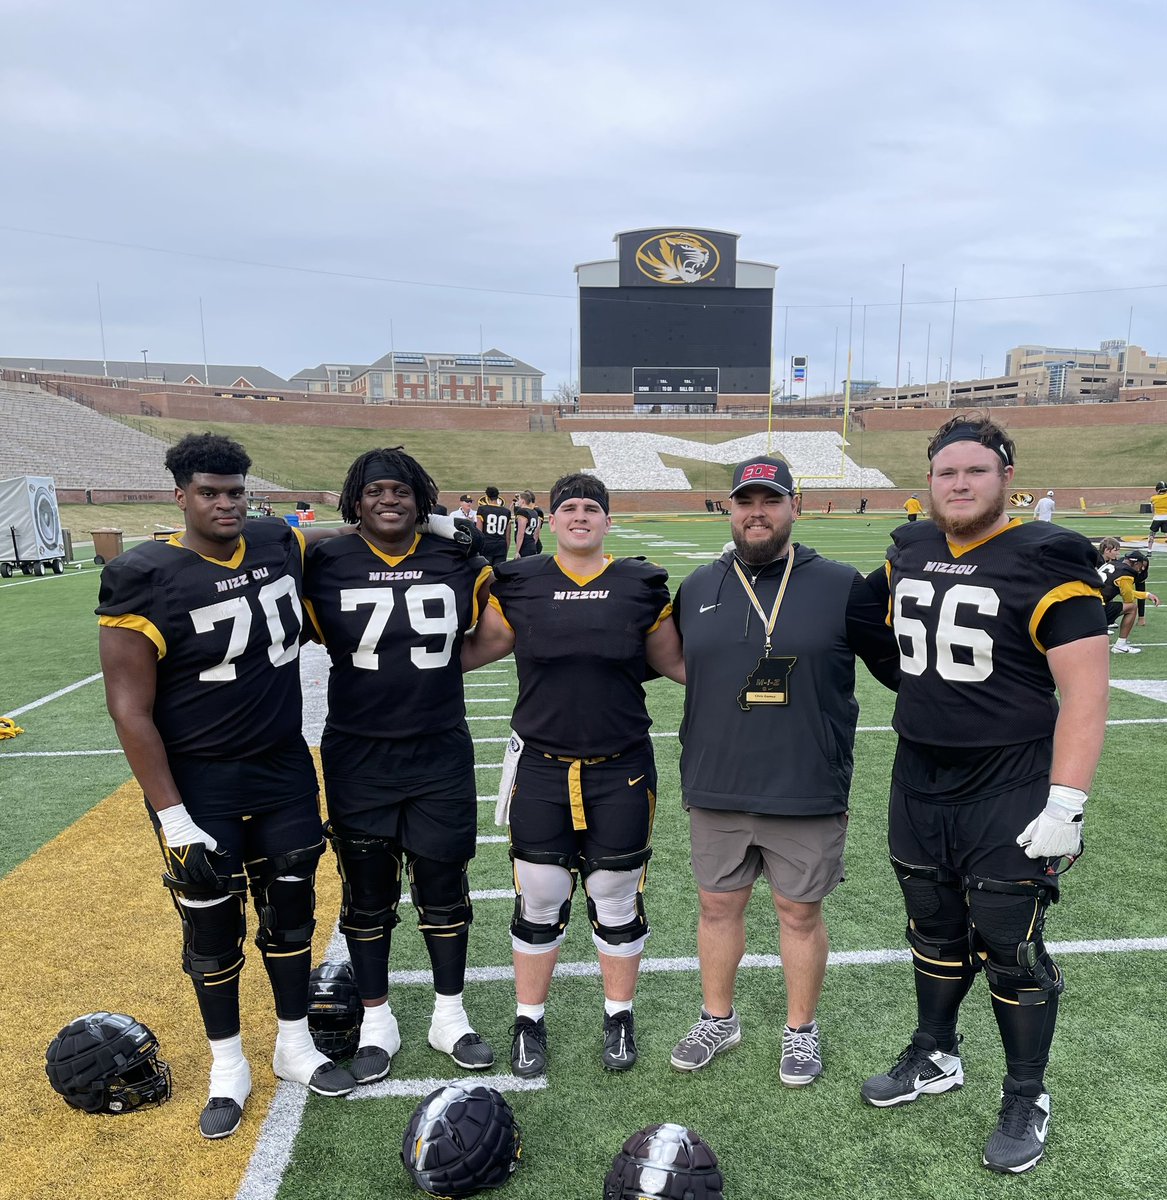 Really Appreciate @CoachJonesB and the Mizzou staff for letting me come out and watch them operate! Big Things coming in Como!#EOE #ElevateOrEliminate